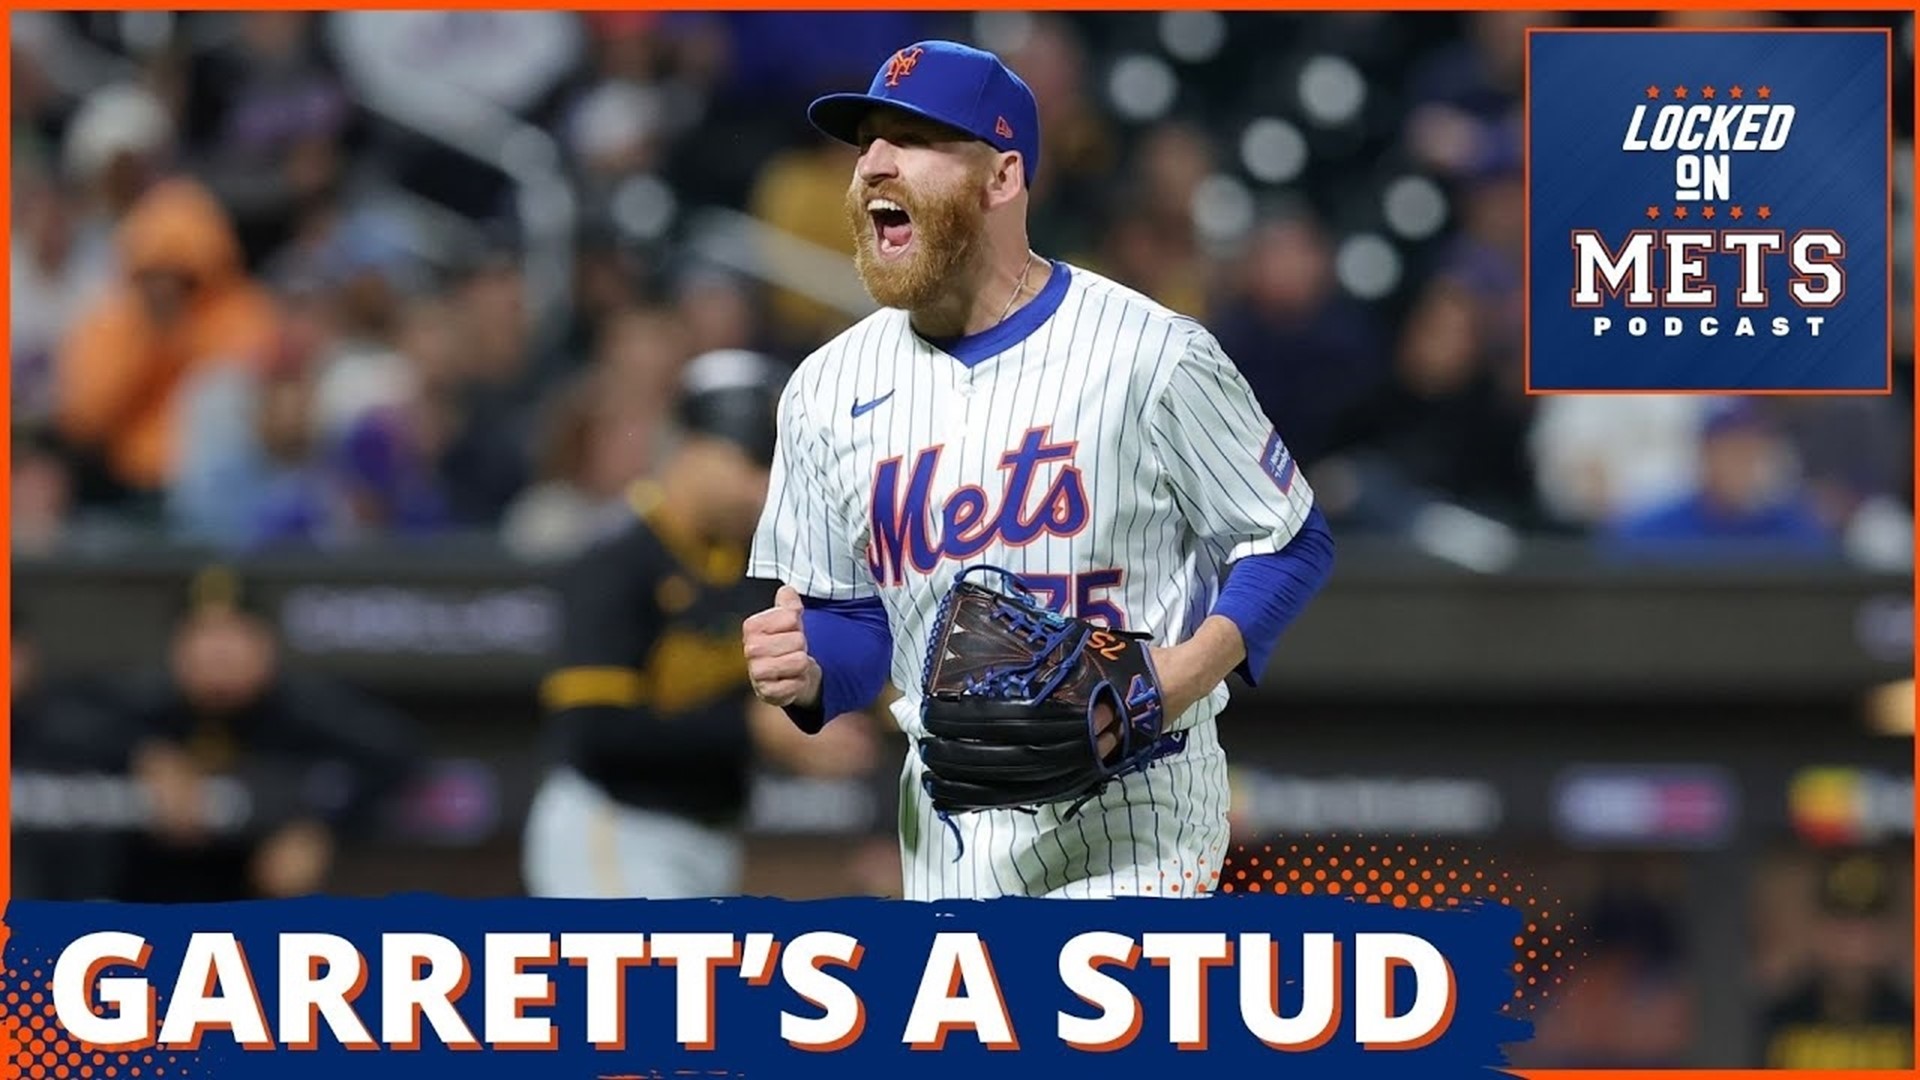 The New York Mets have won their fourth-consecutive series, thanks to another outstanding effort by their bullpen and some timely hitting.